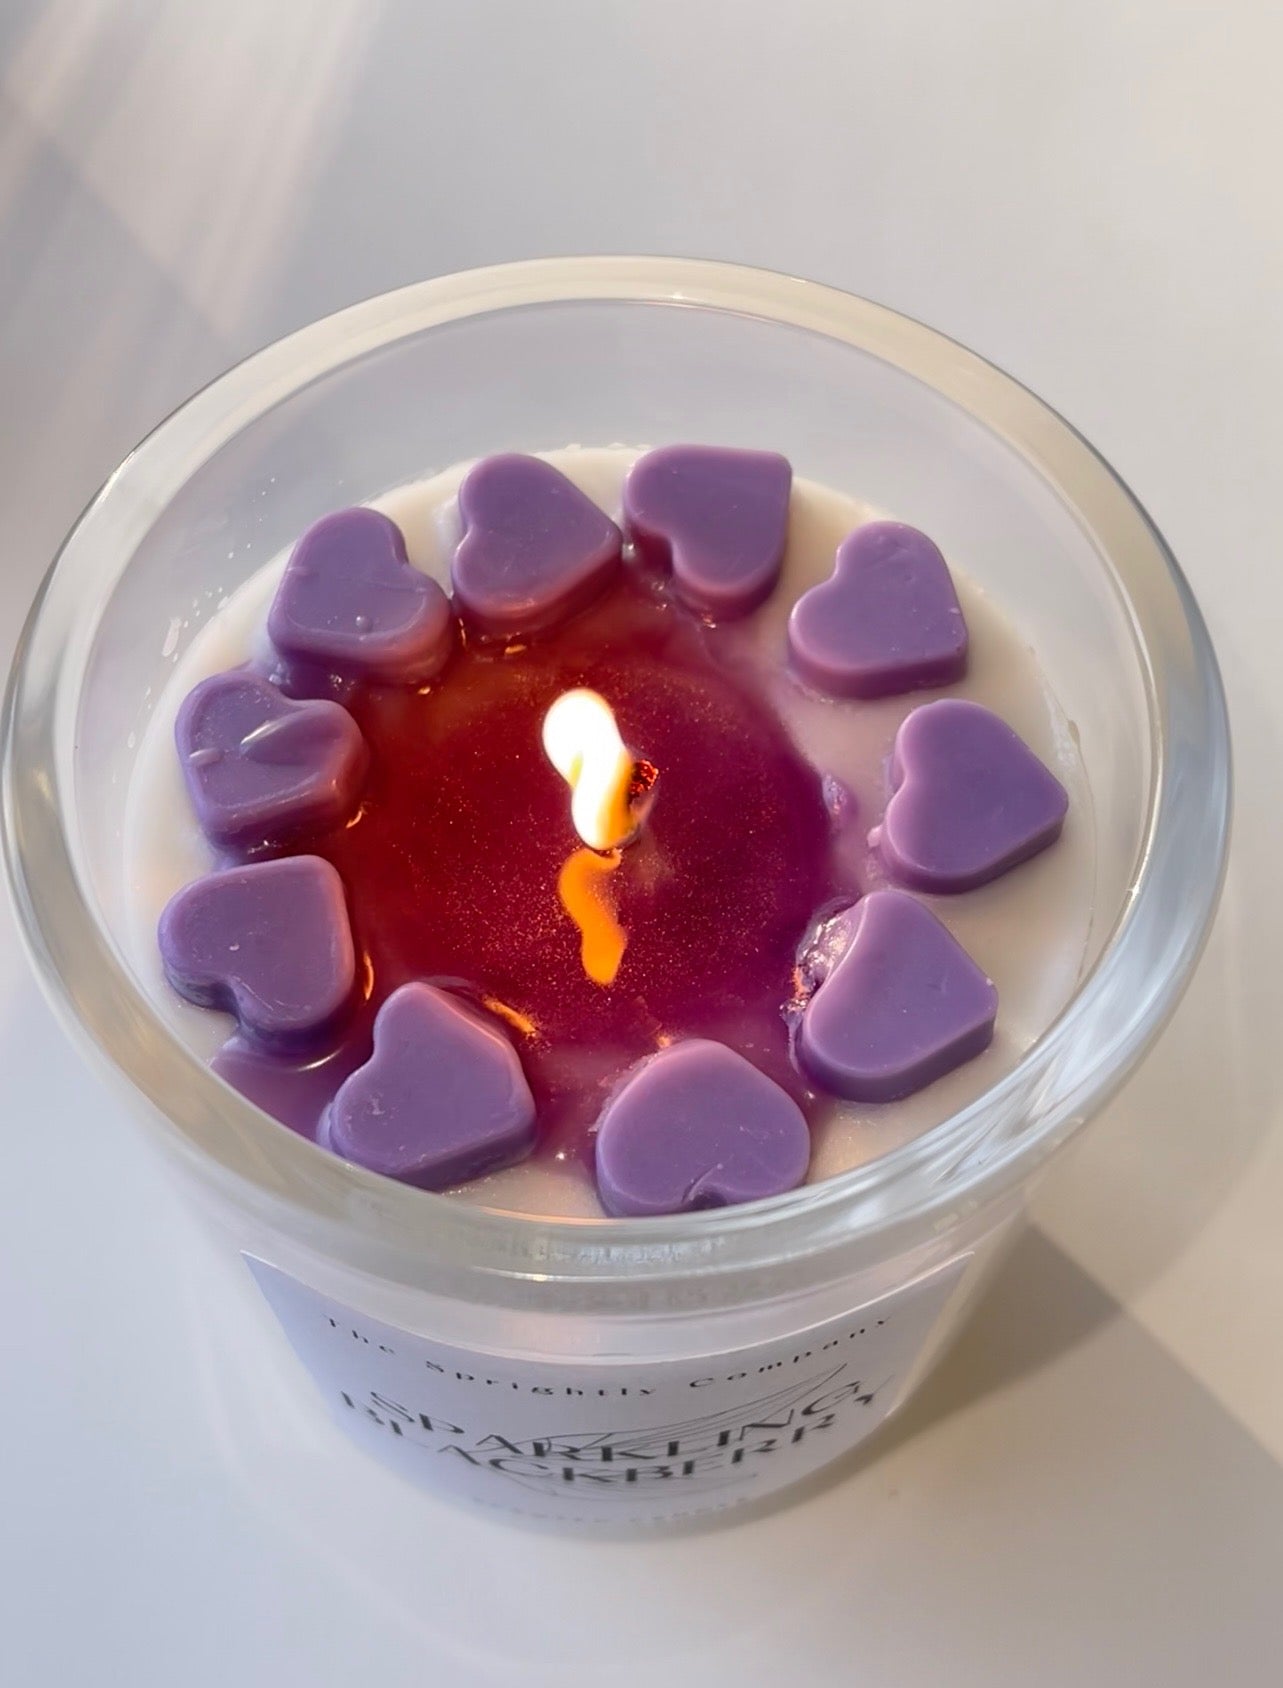 Sparkling Blackberry Sweetheart Candle